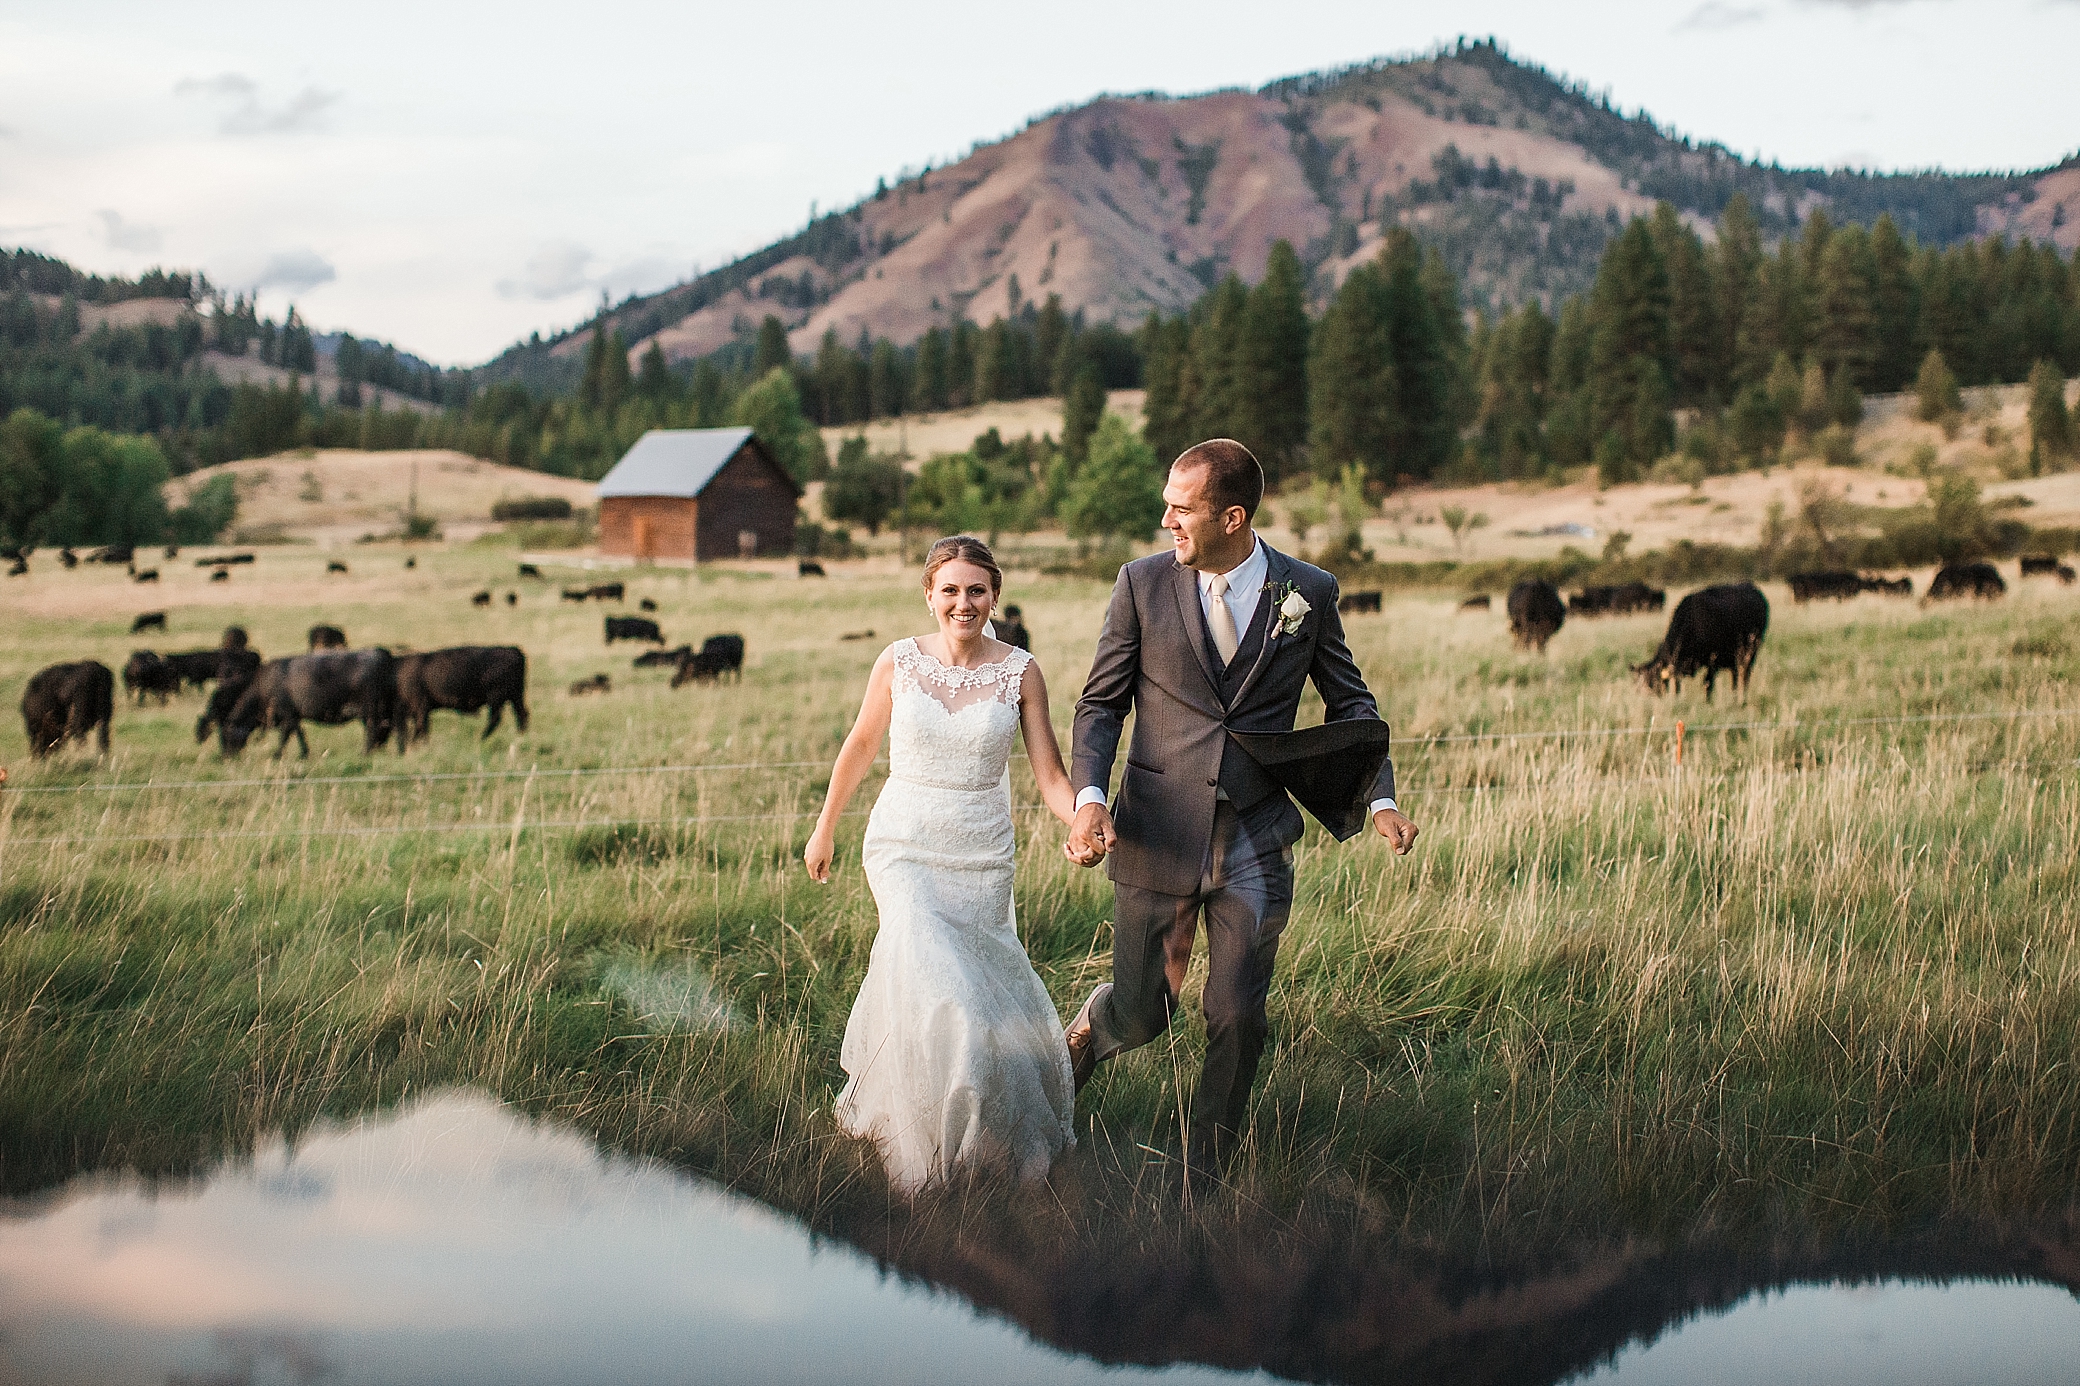 Bride and Groom Portraits in the fields at The Cattle Barn in Cle Elum, Washington. Photographed by Washington Wedding Photographer, Megan Montalvo Photography. 